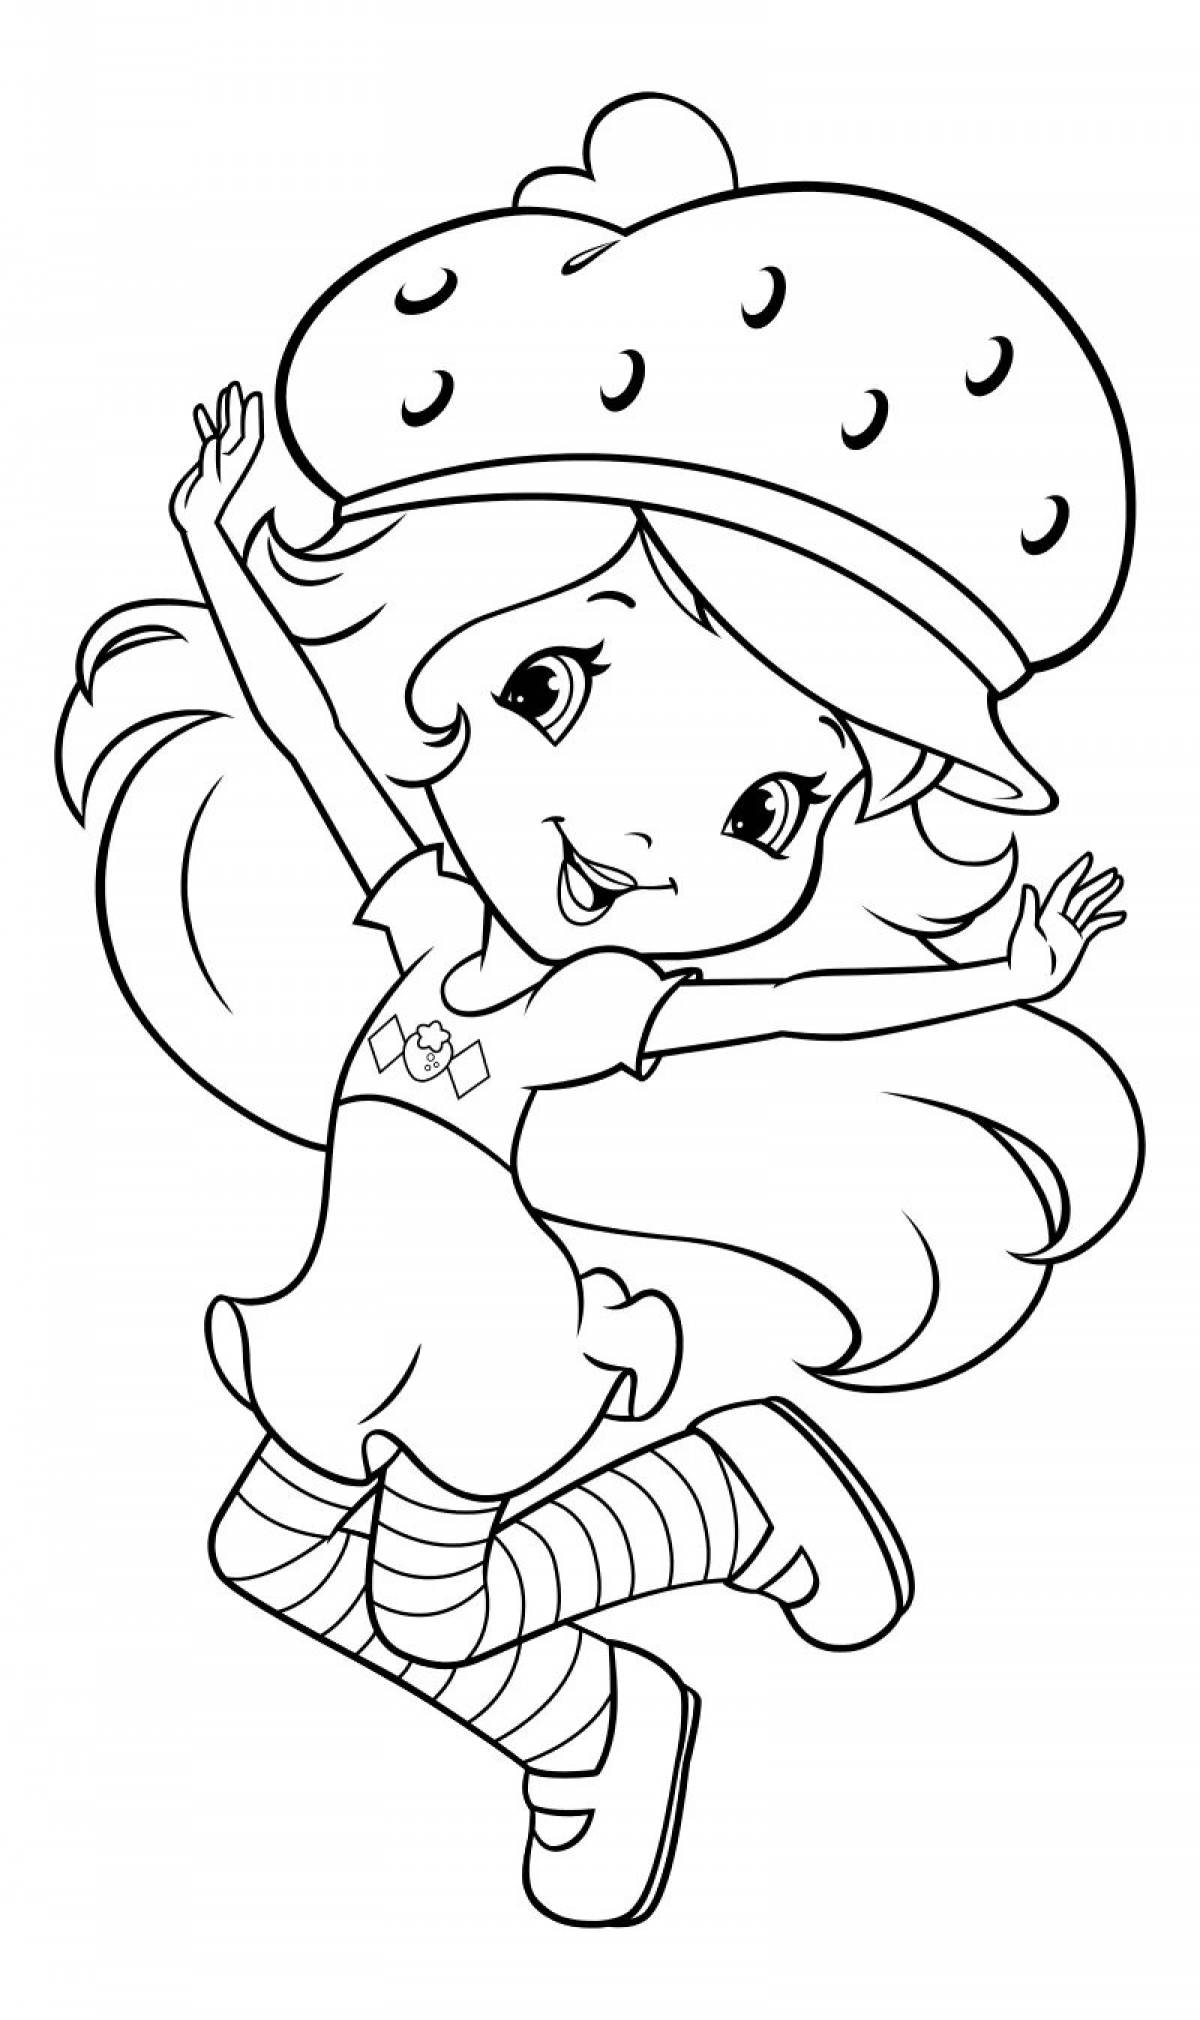 Charming Charlotte Strawberry coloring pages for girls